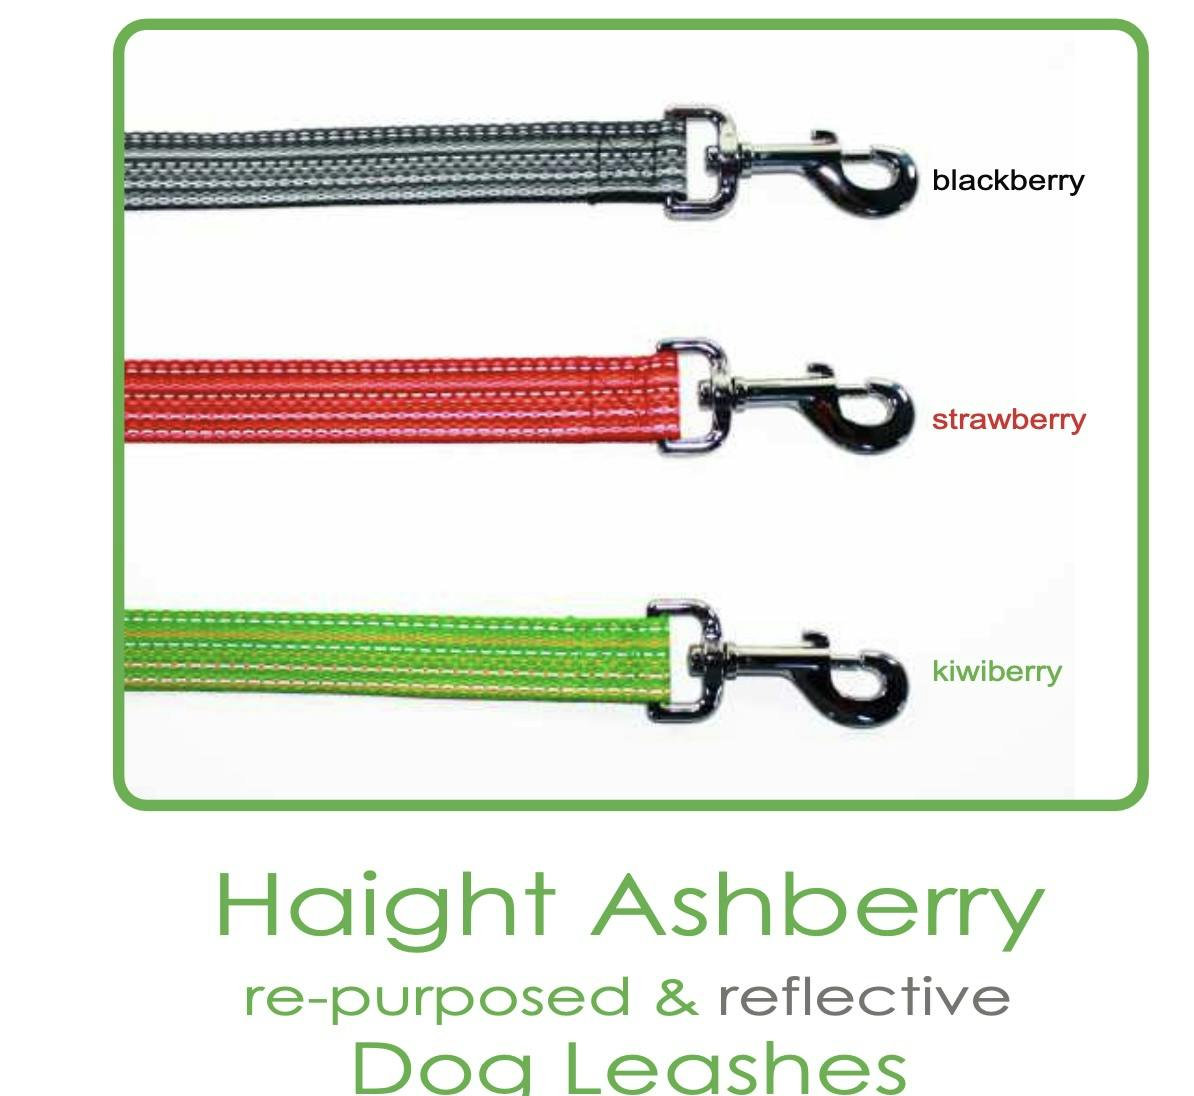 Dog Leash - Haight Ashberry Repurposed & Reflective